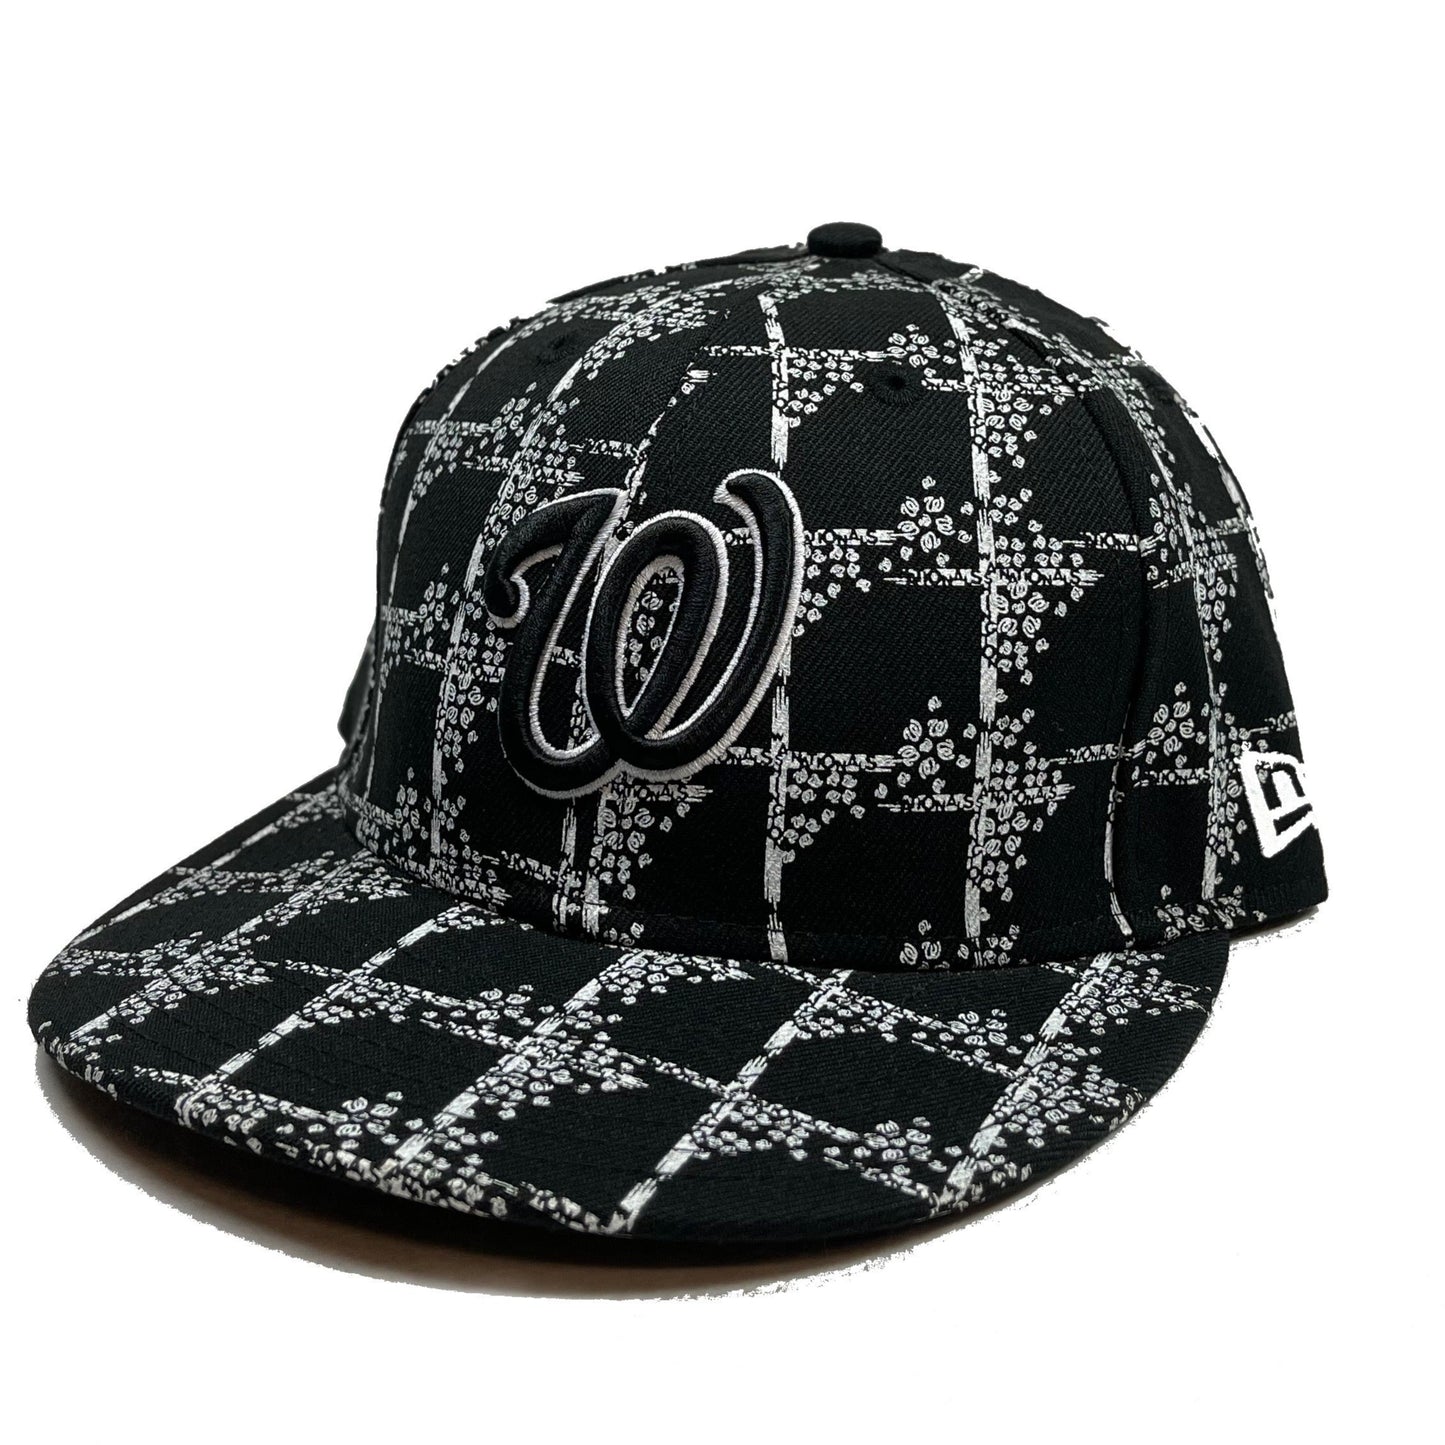 Washington Nationals Wicked (Black) Fitted